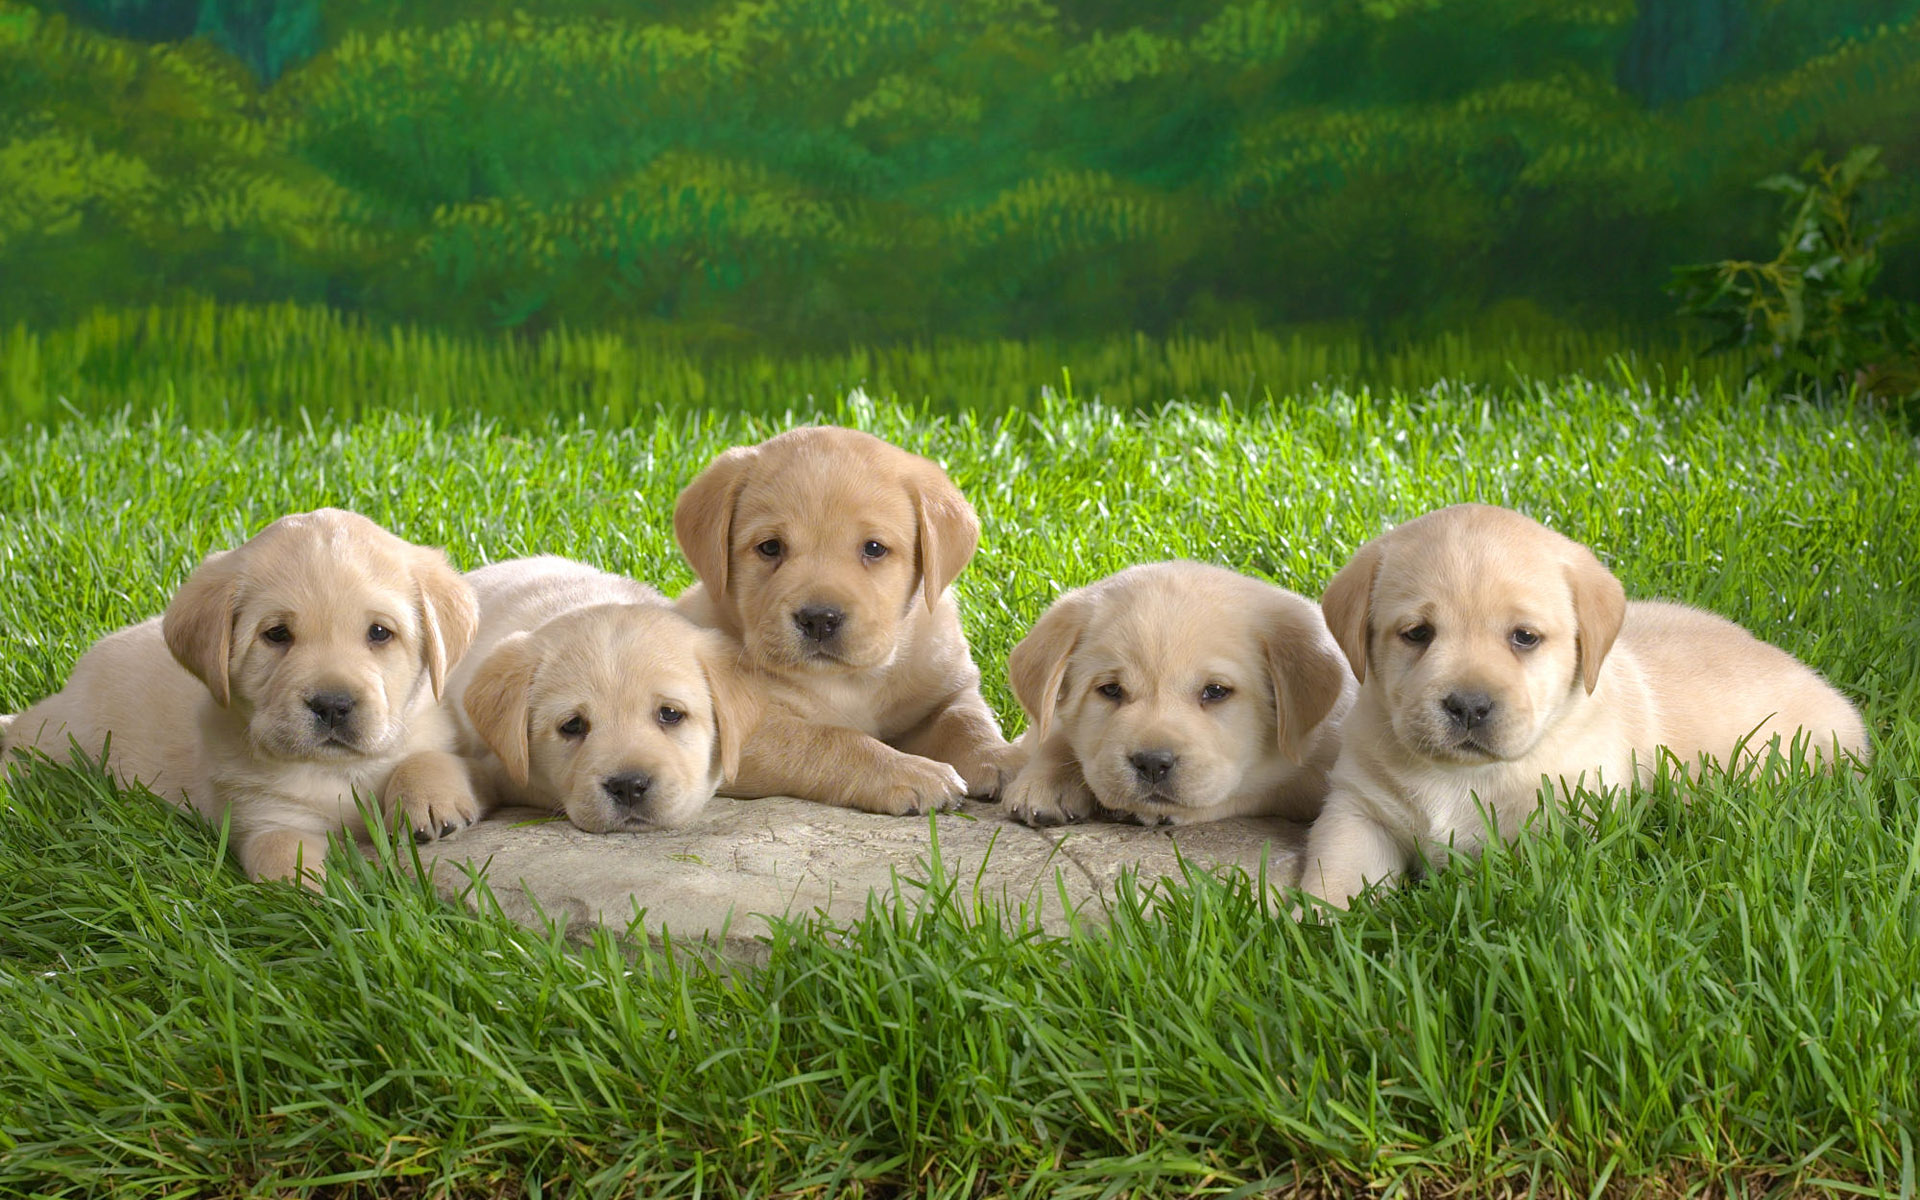 Puppy Backgrounds